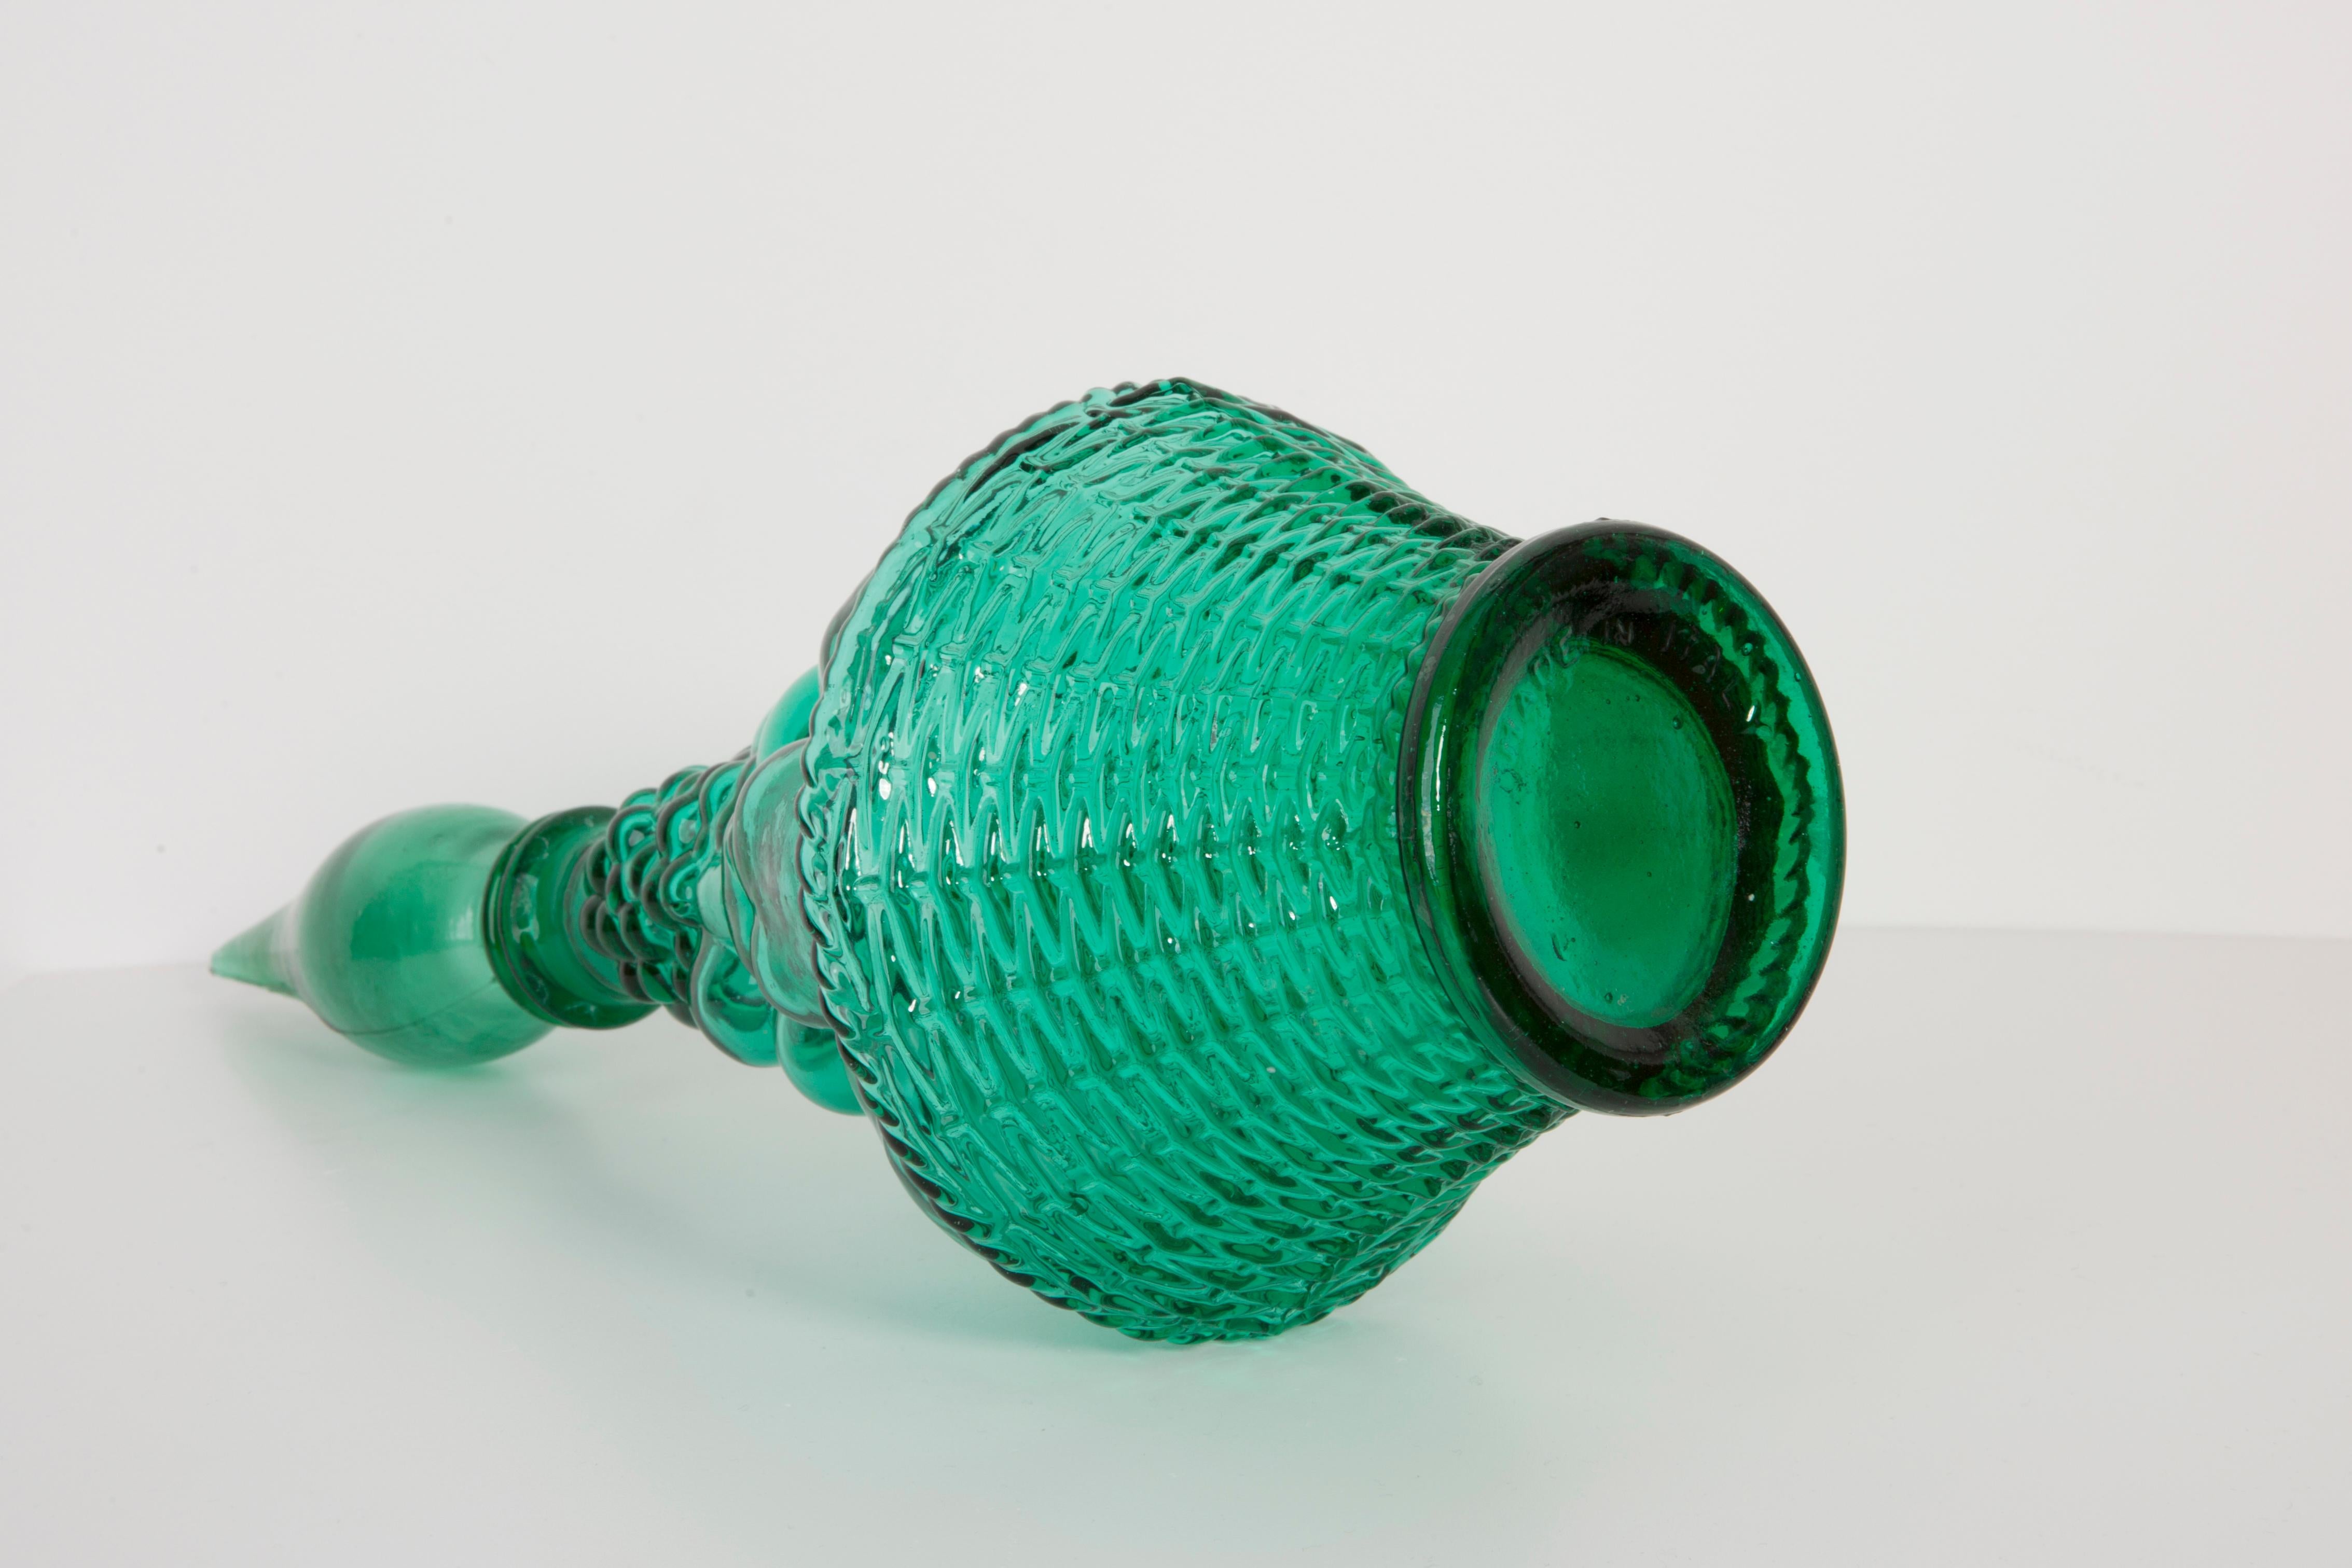 Mid-Century Modern Set of Two Green Glass Genie Decanters with Stoppers, 20th Century, Italy, 1960s For Sale